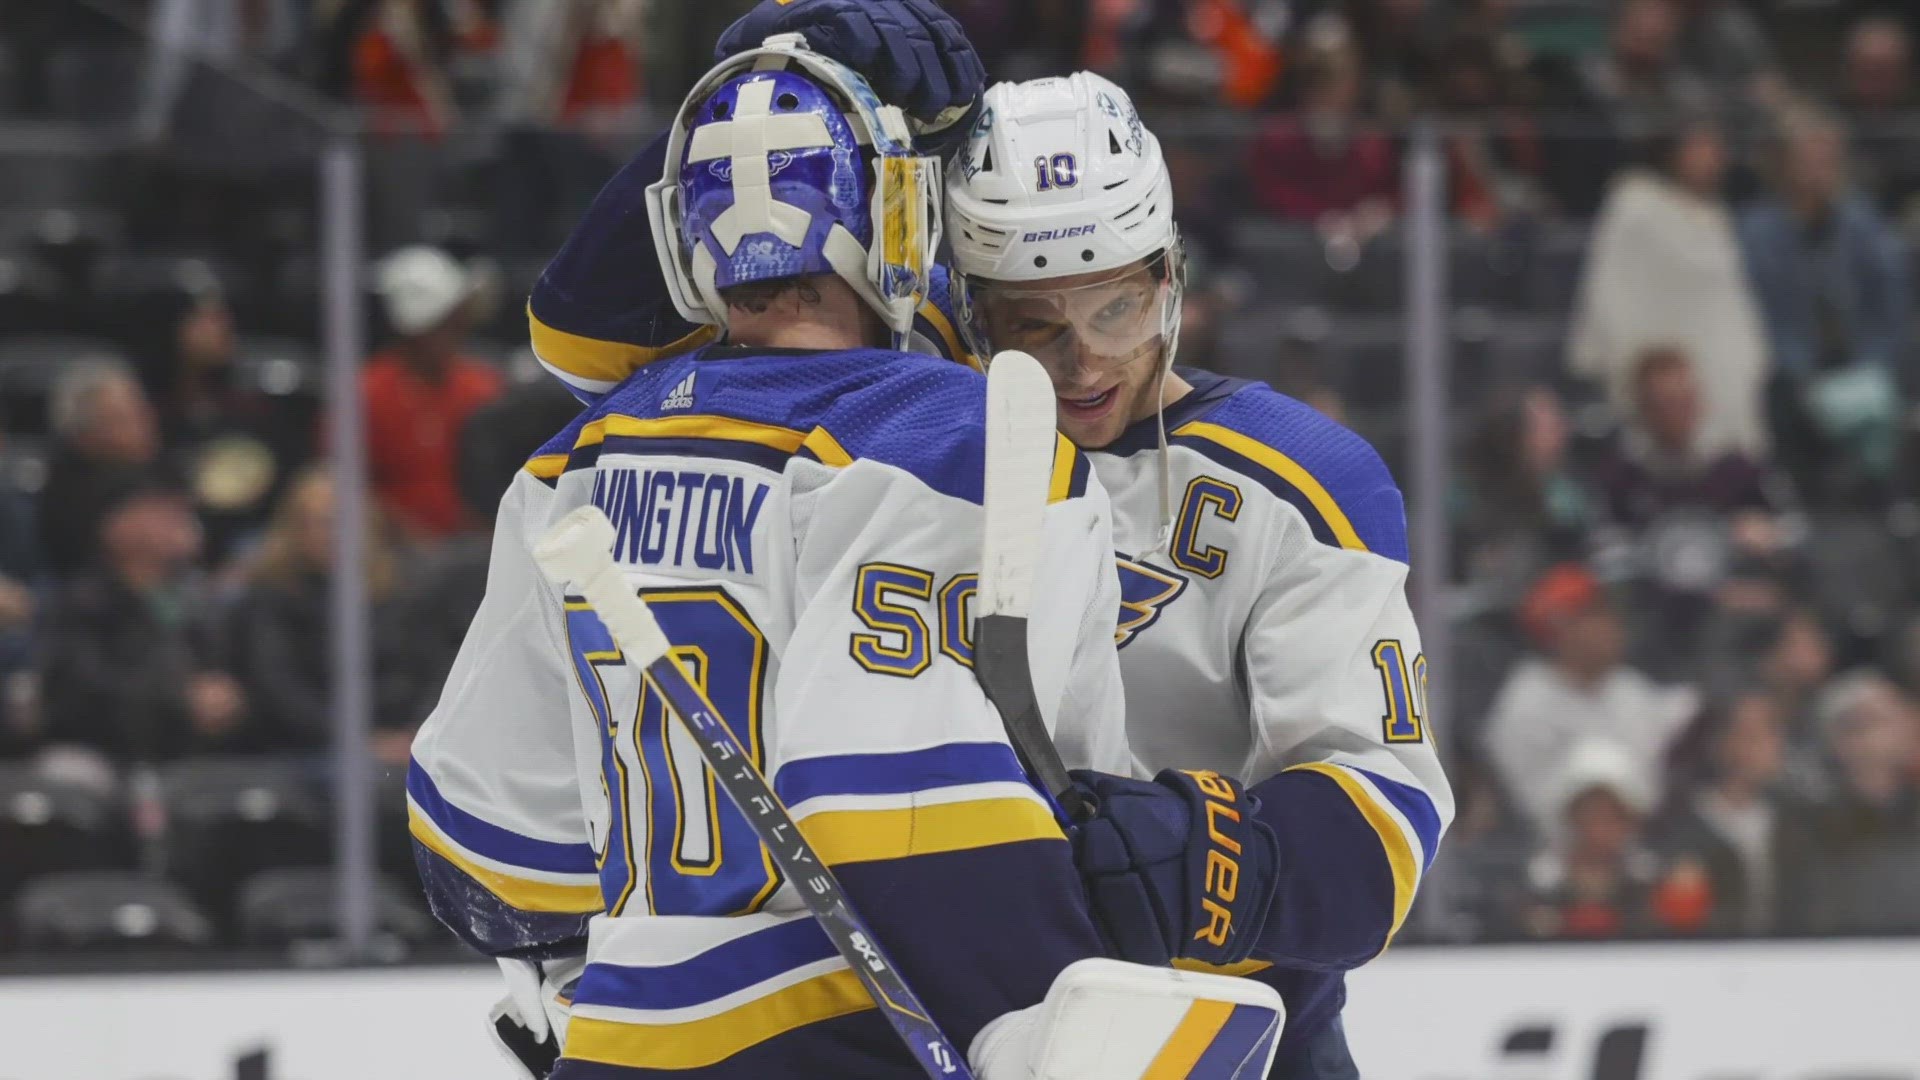 The St. Louis Blues are playoffless in back-to-back years for the first time since 2011. The team had their exit interviews on Thursday after the end of the season.